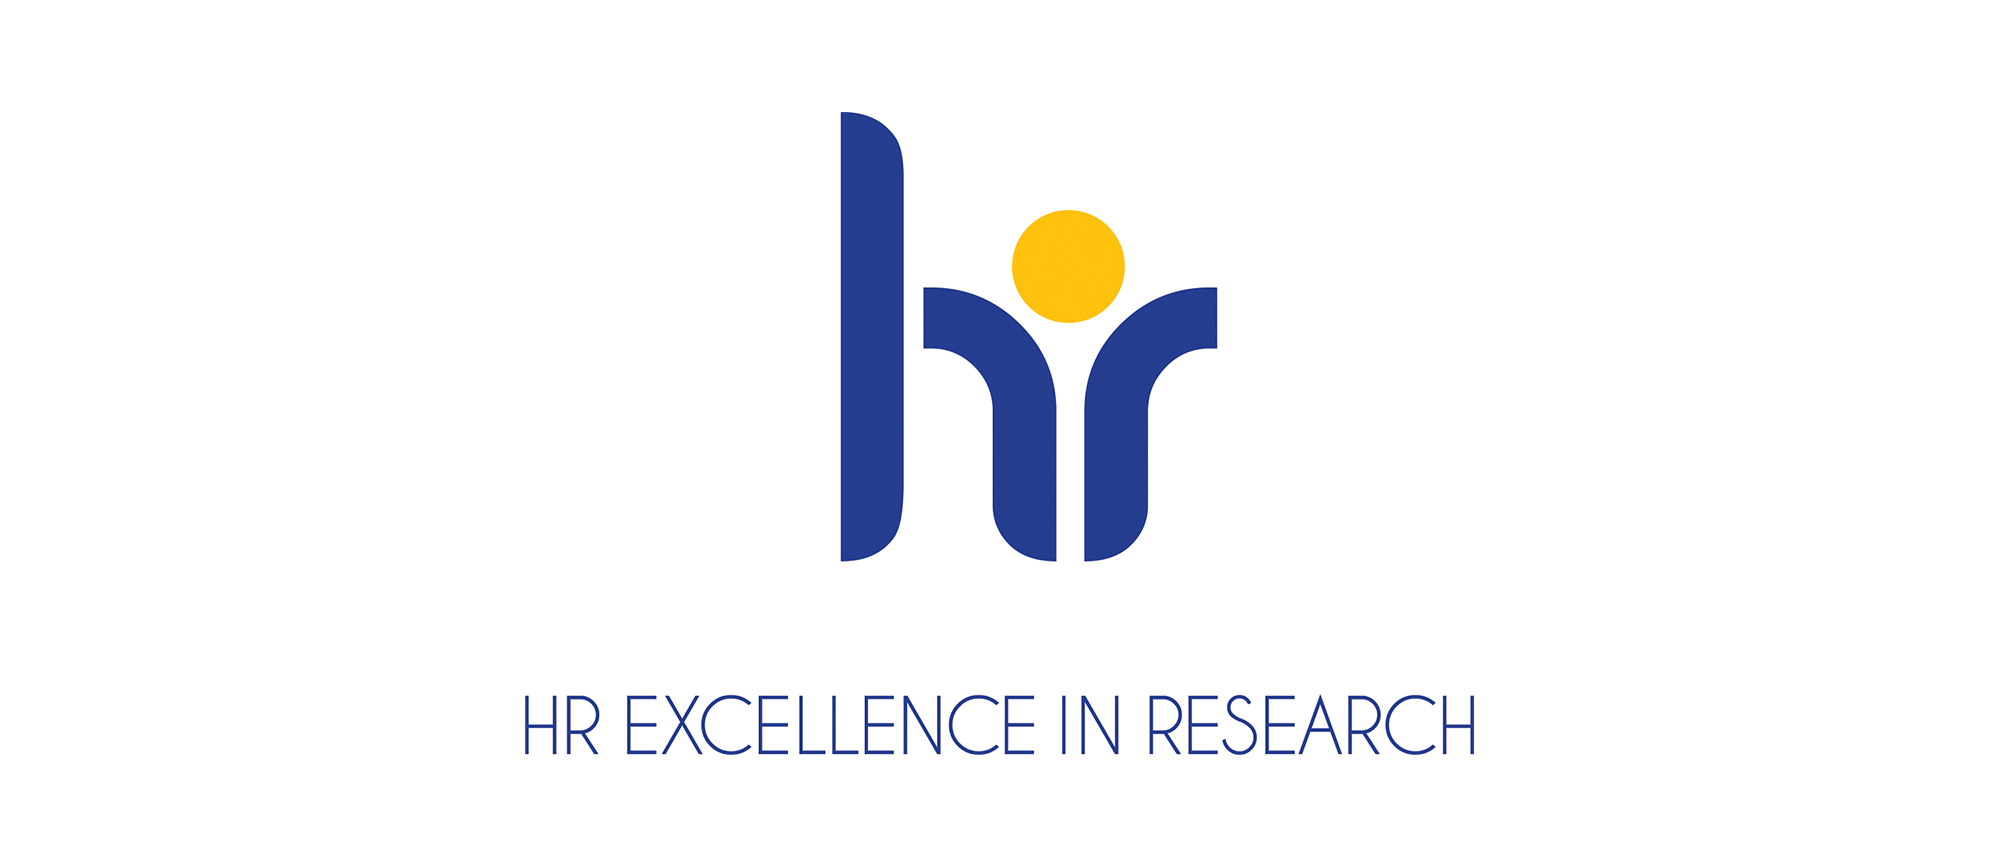 The European Commissions "HR Excellence in Research" icon